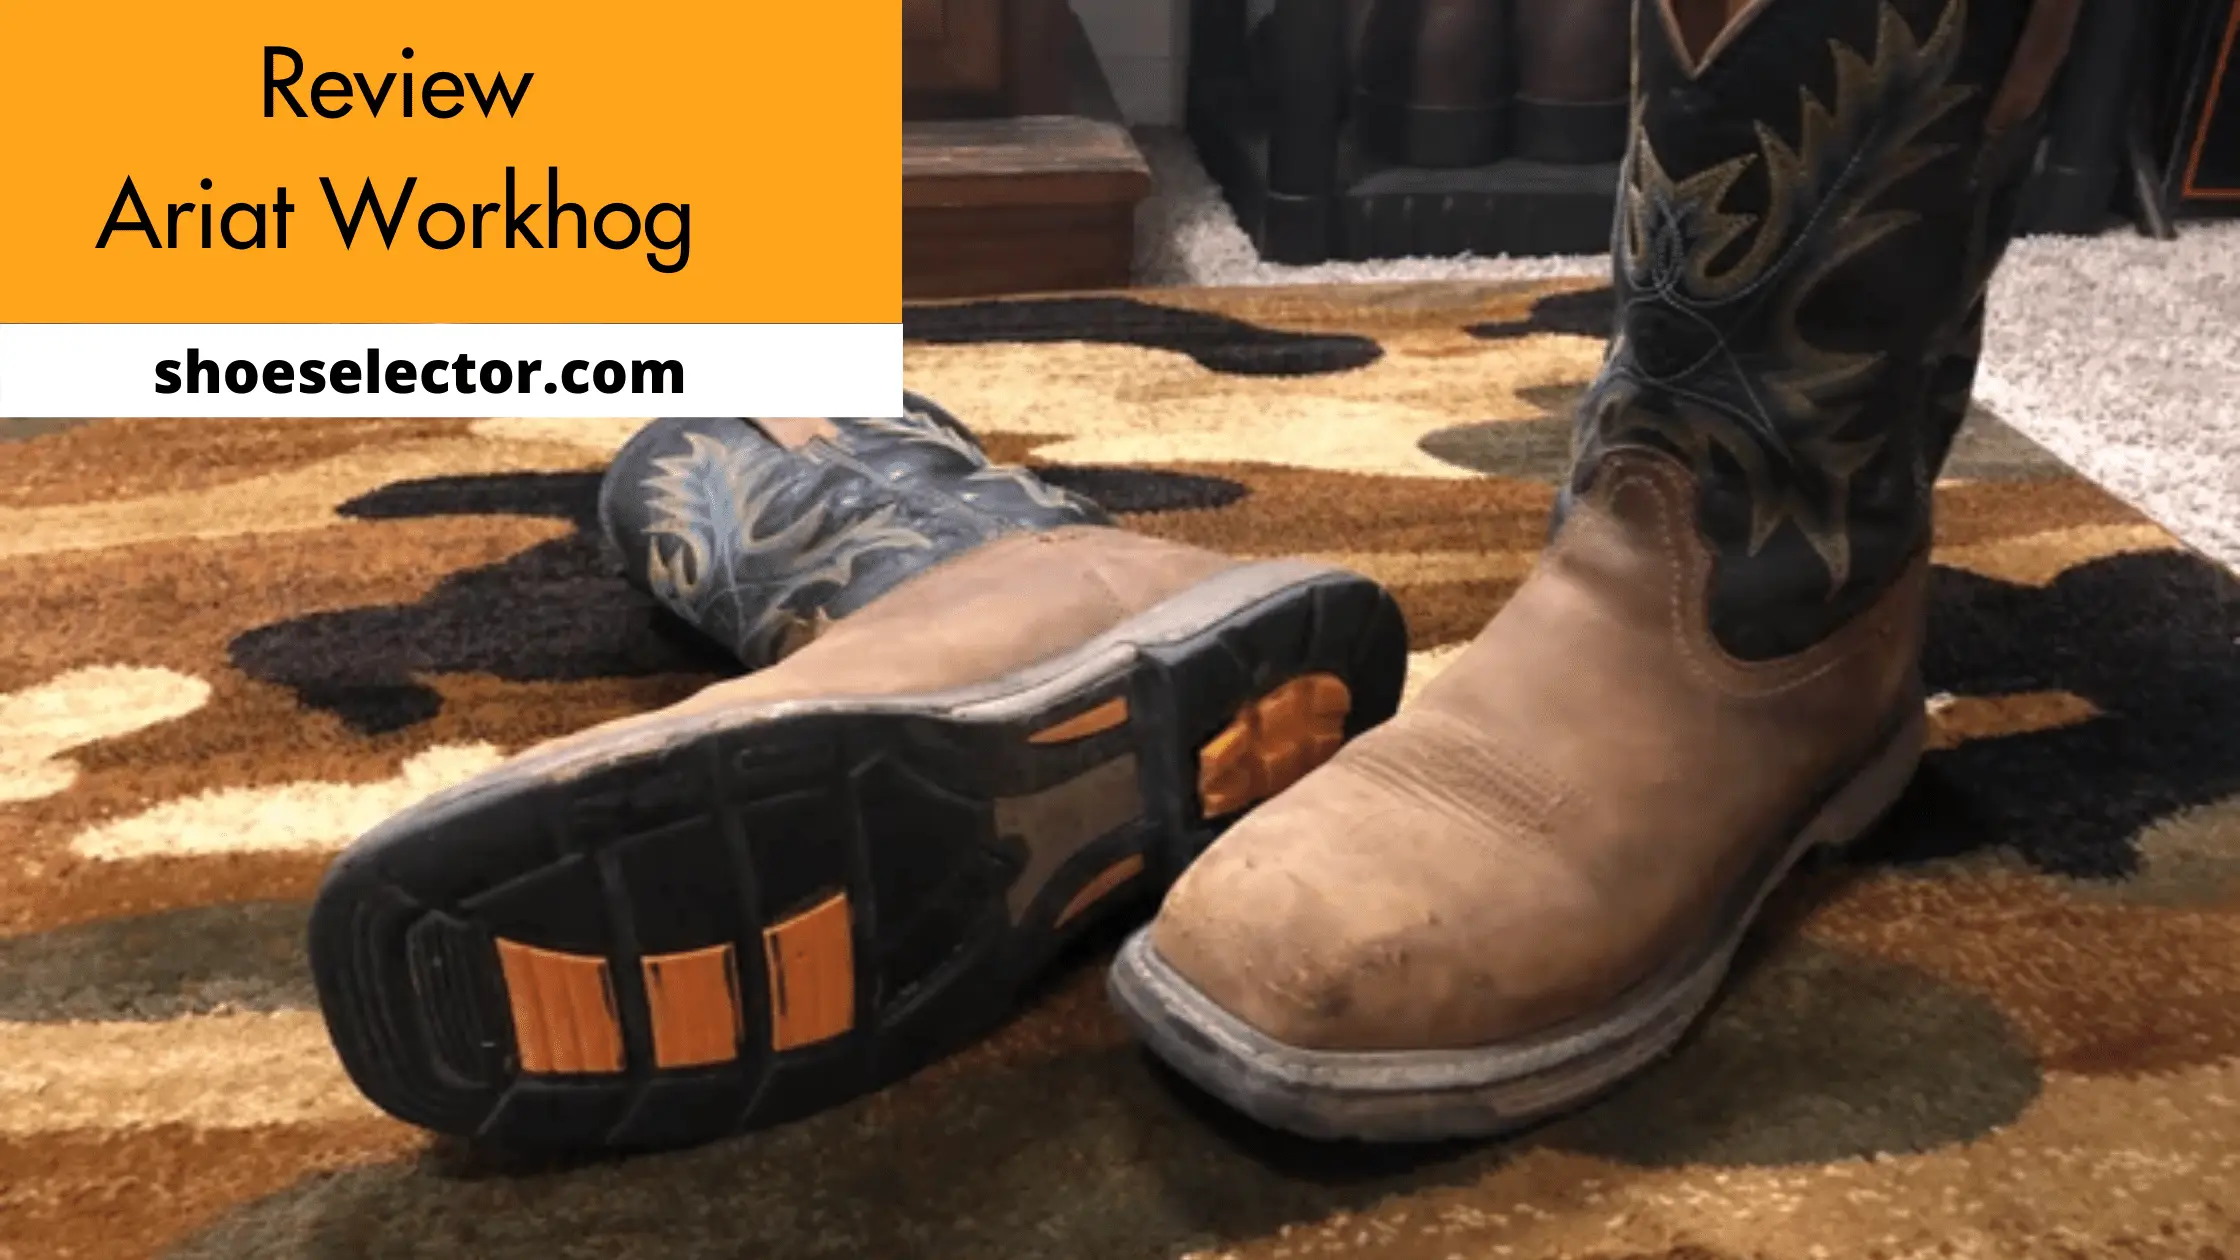 Ariat Workhog Review - Recommended Guide